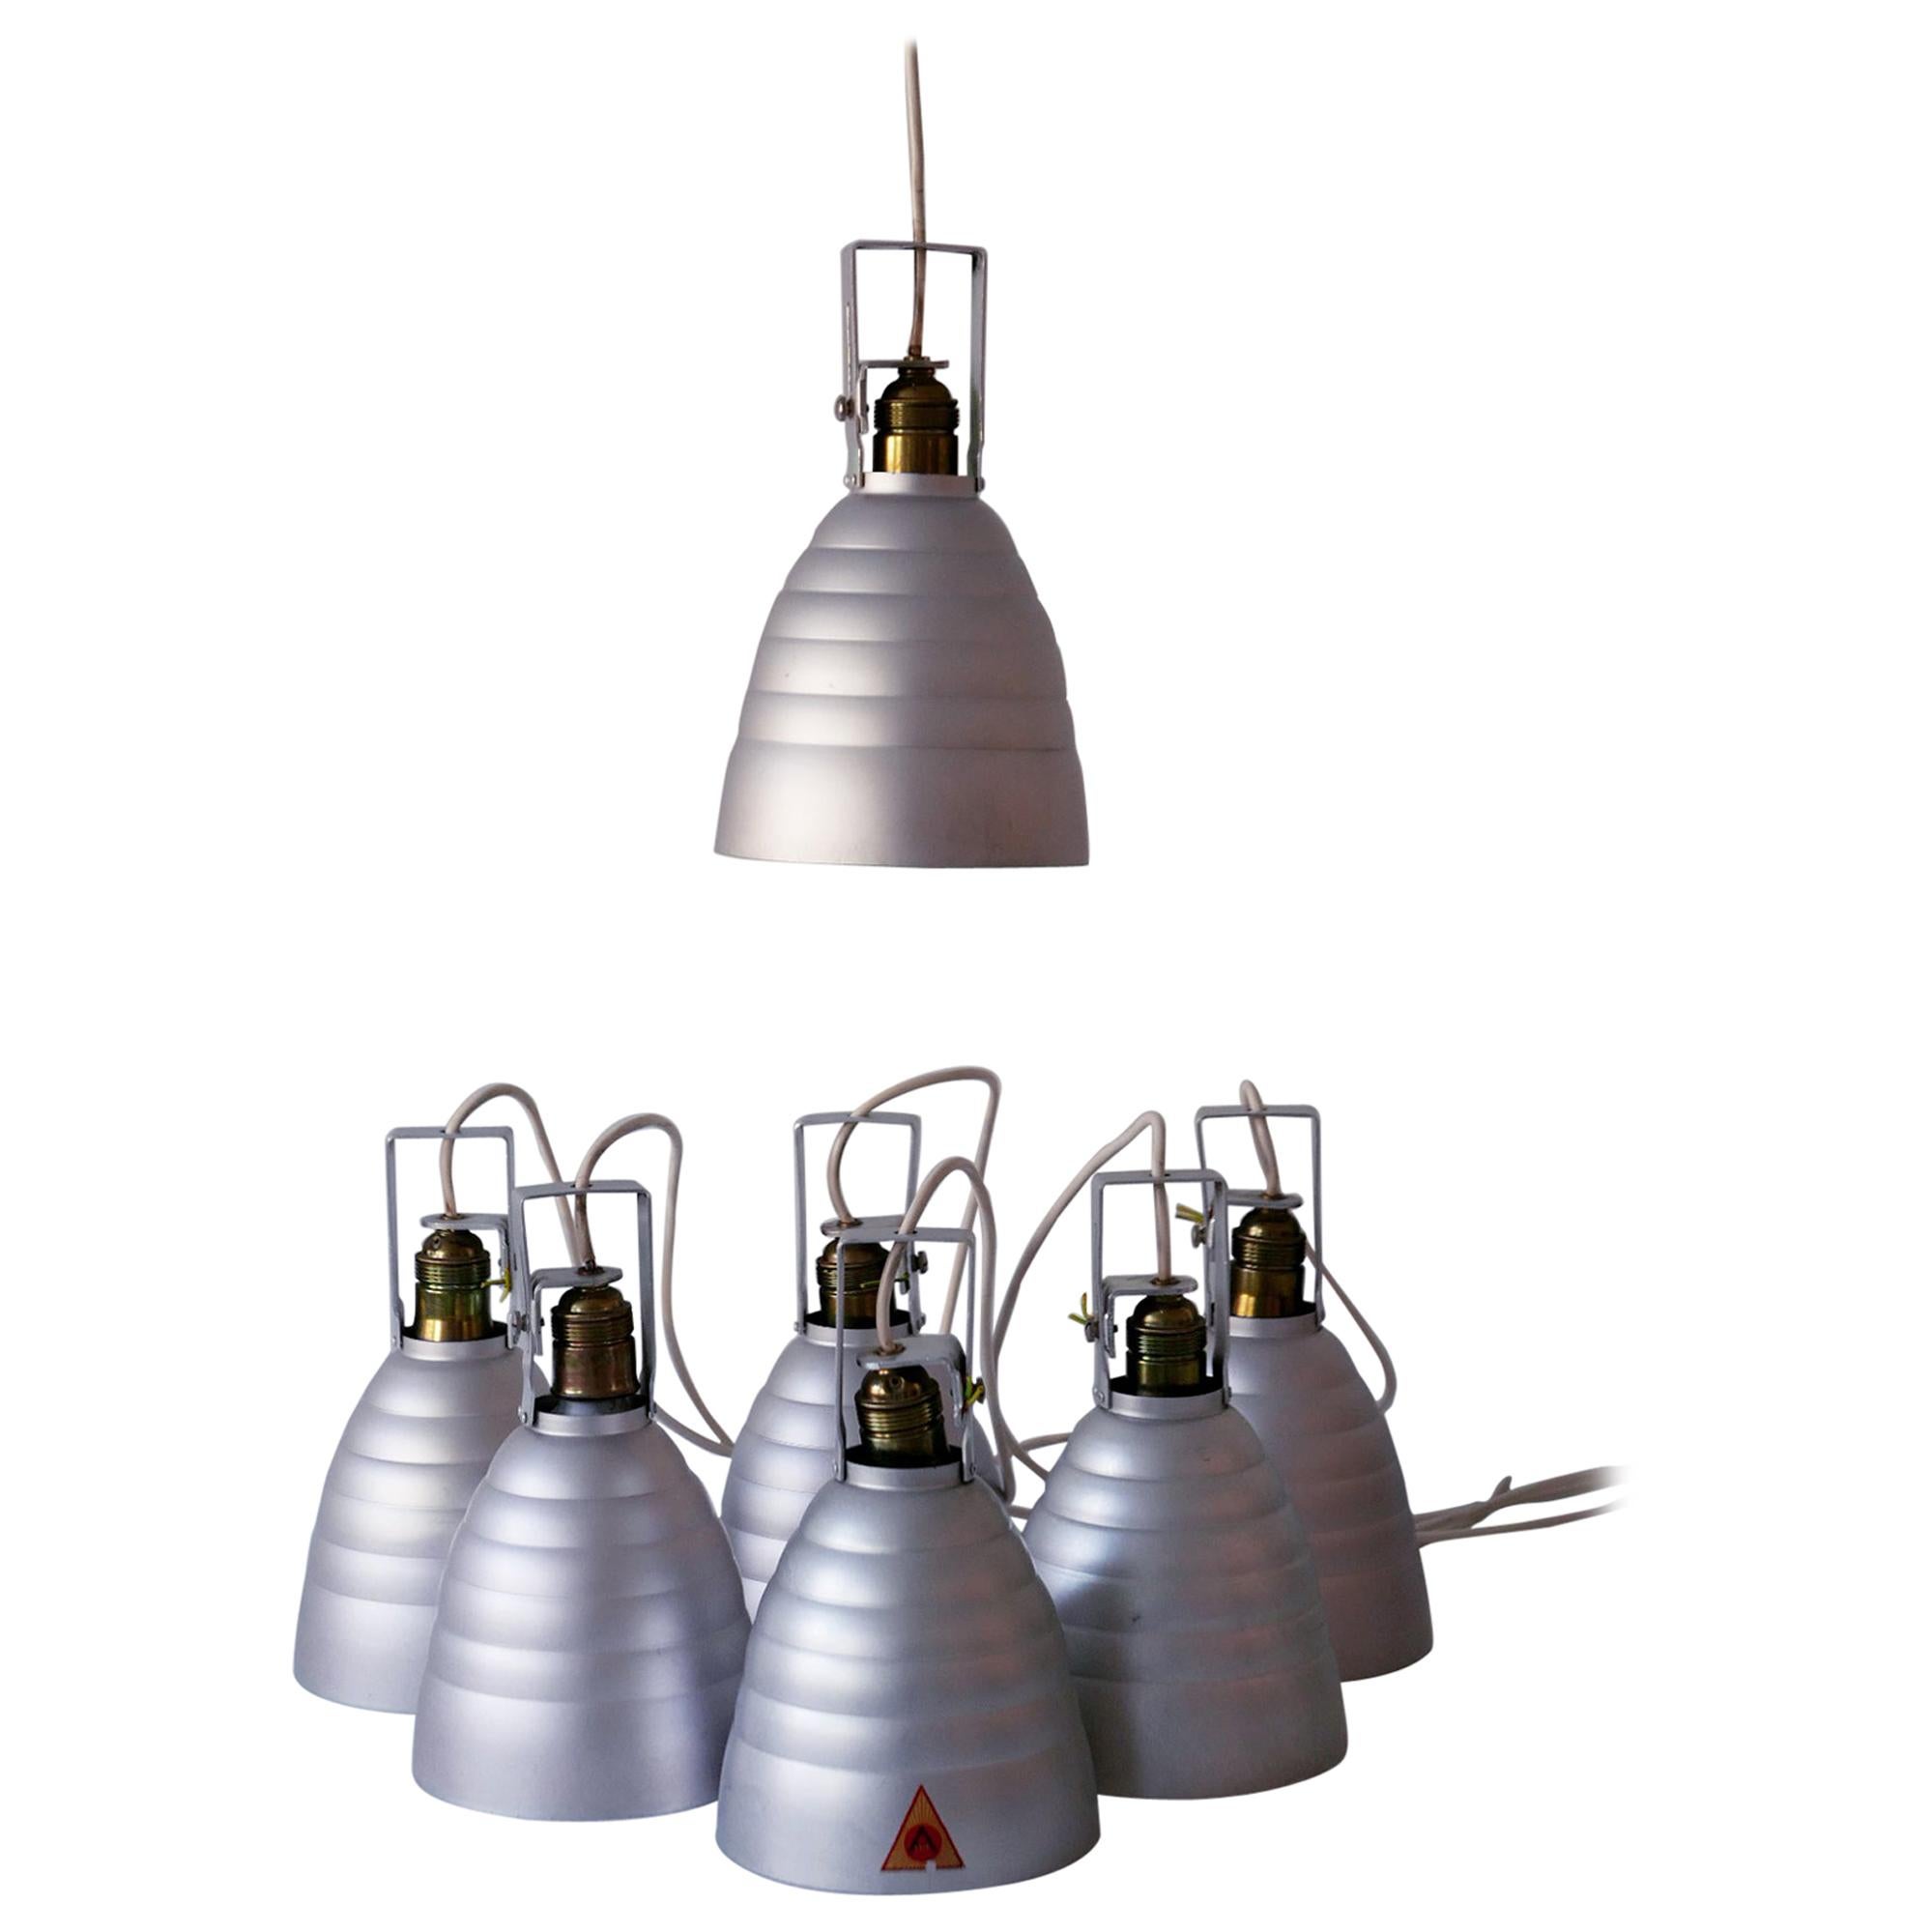 Mid-Century Modern Matte Ceiling Spot Lights or Pendant Lamps, 1950s, Germany